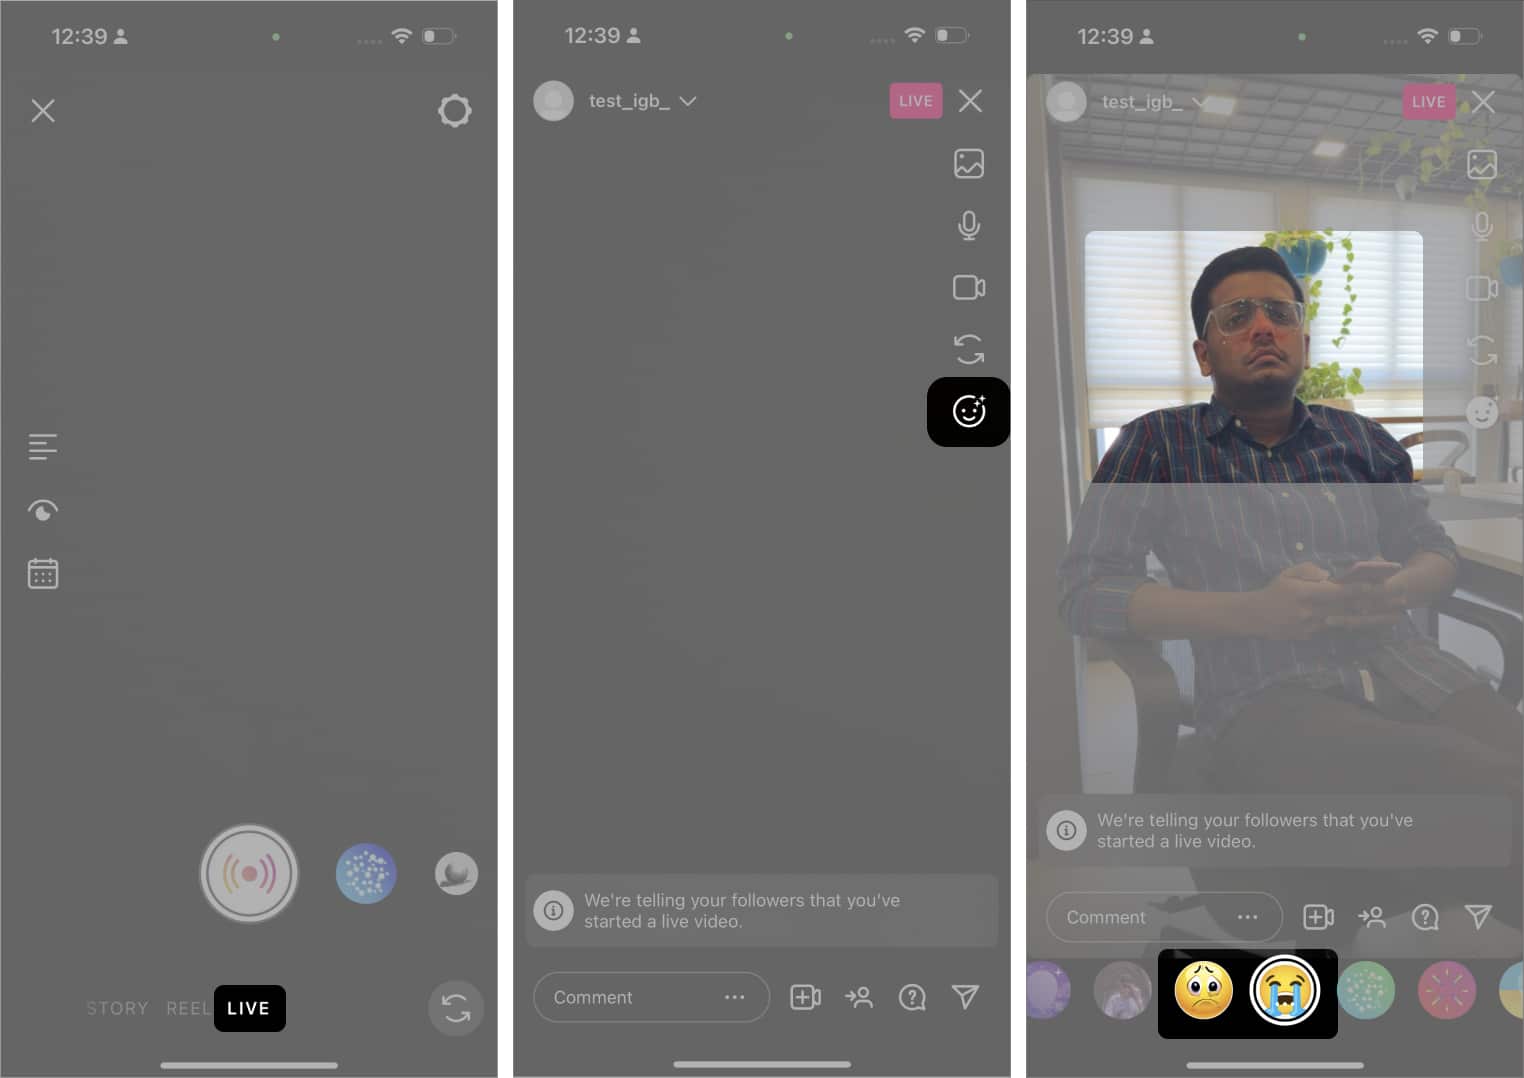 How to use sad face filters on Instagram Live